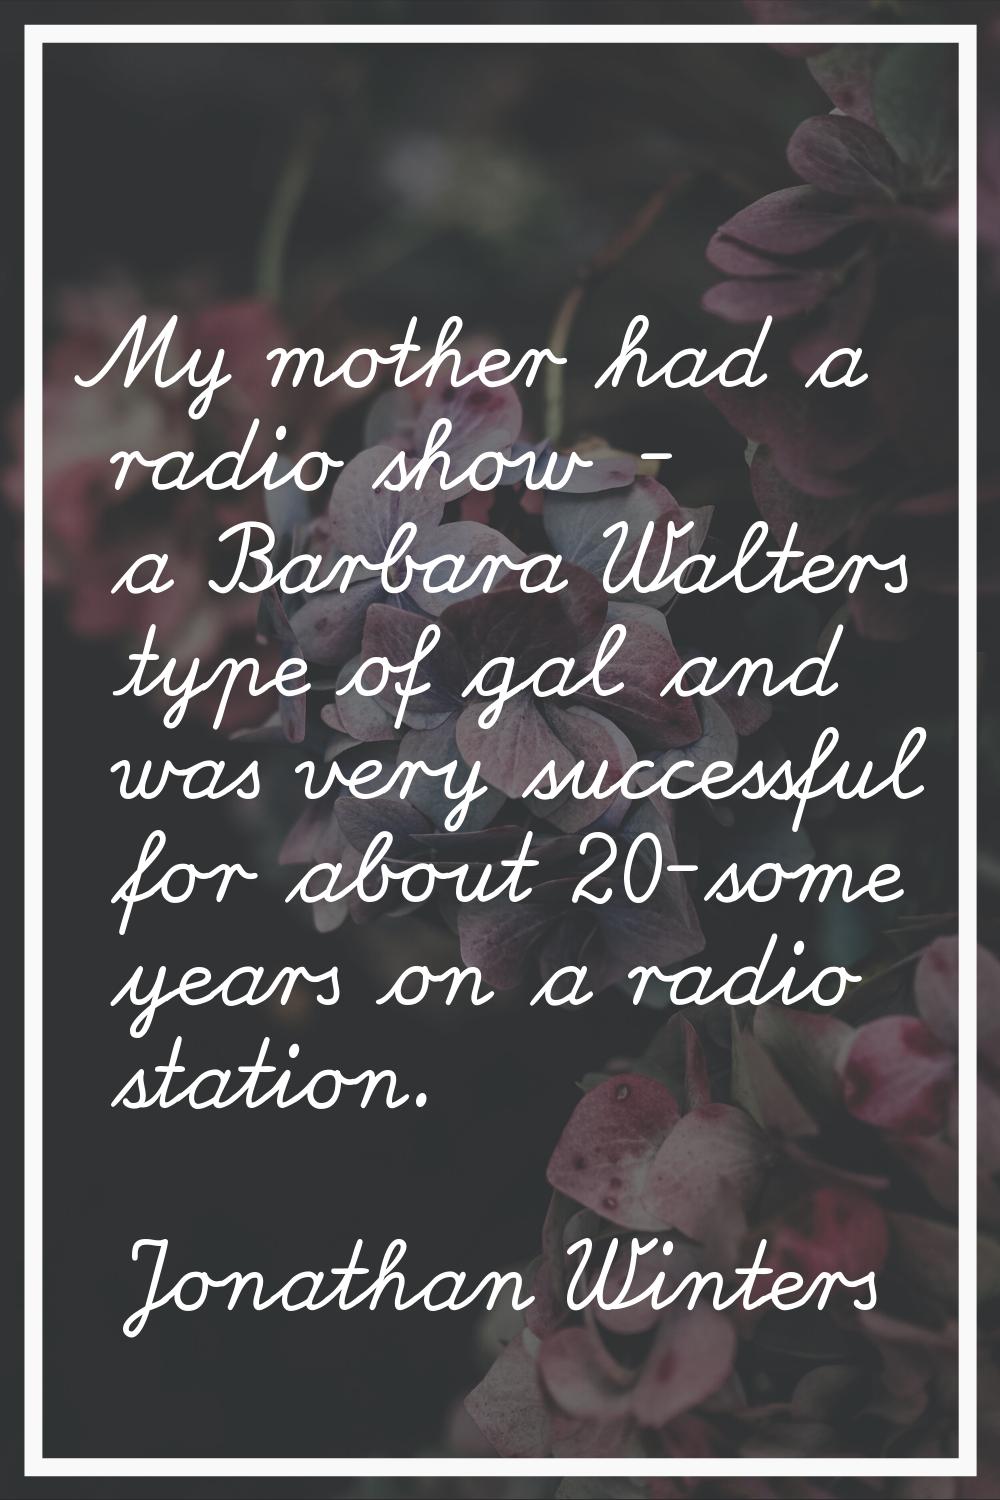 My mother had a radio show - a Barbara Walters type of gal and was very successful for about 20-som